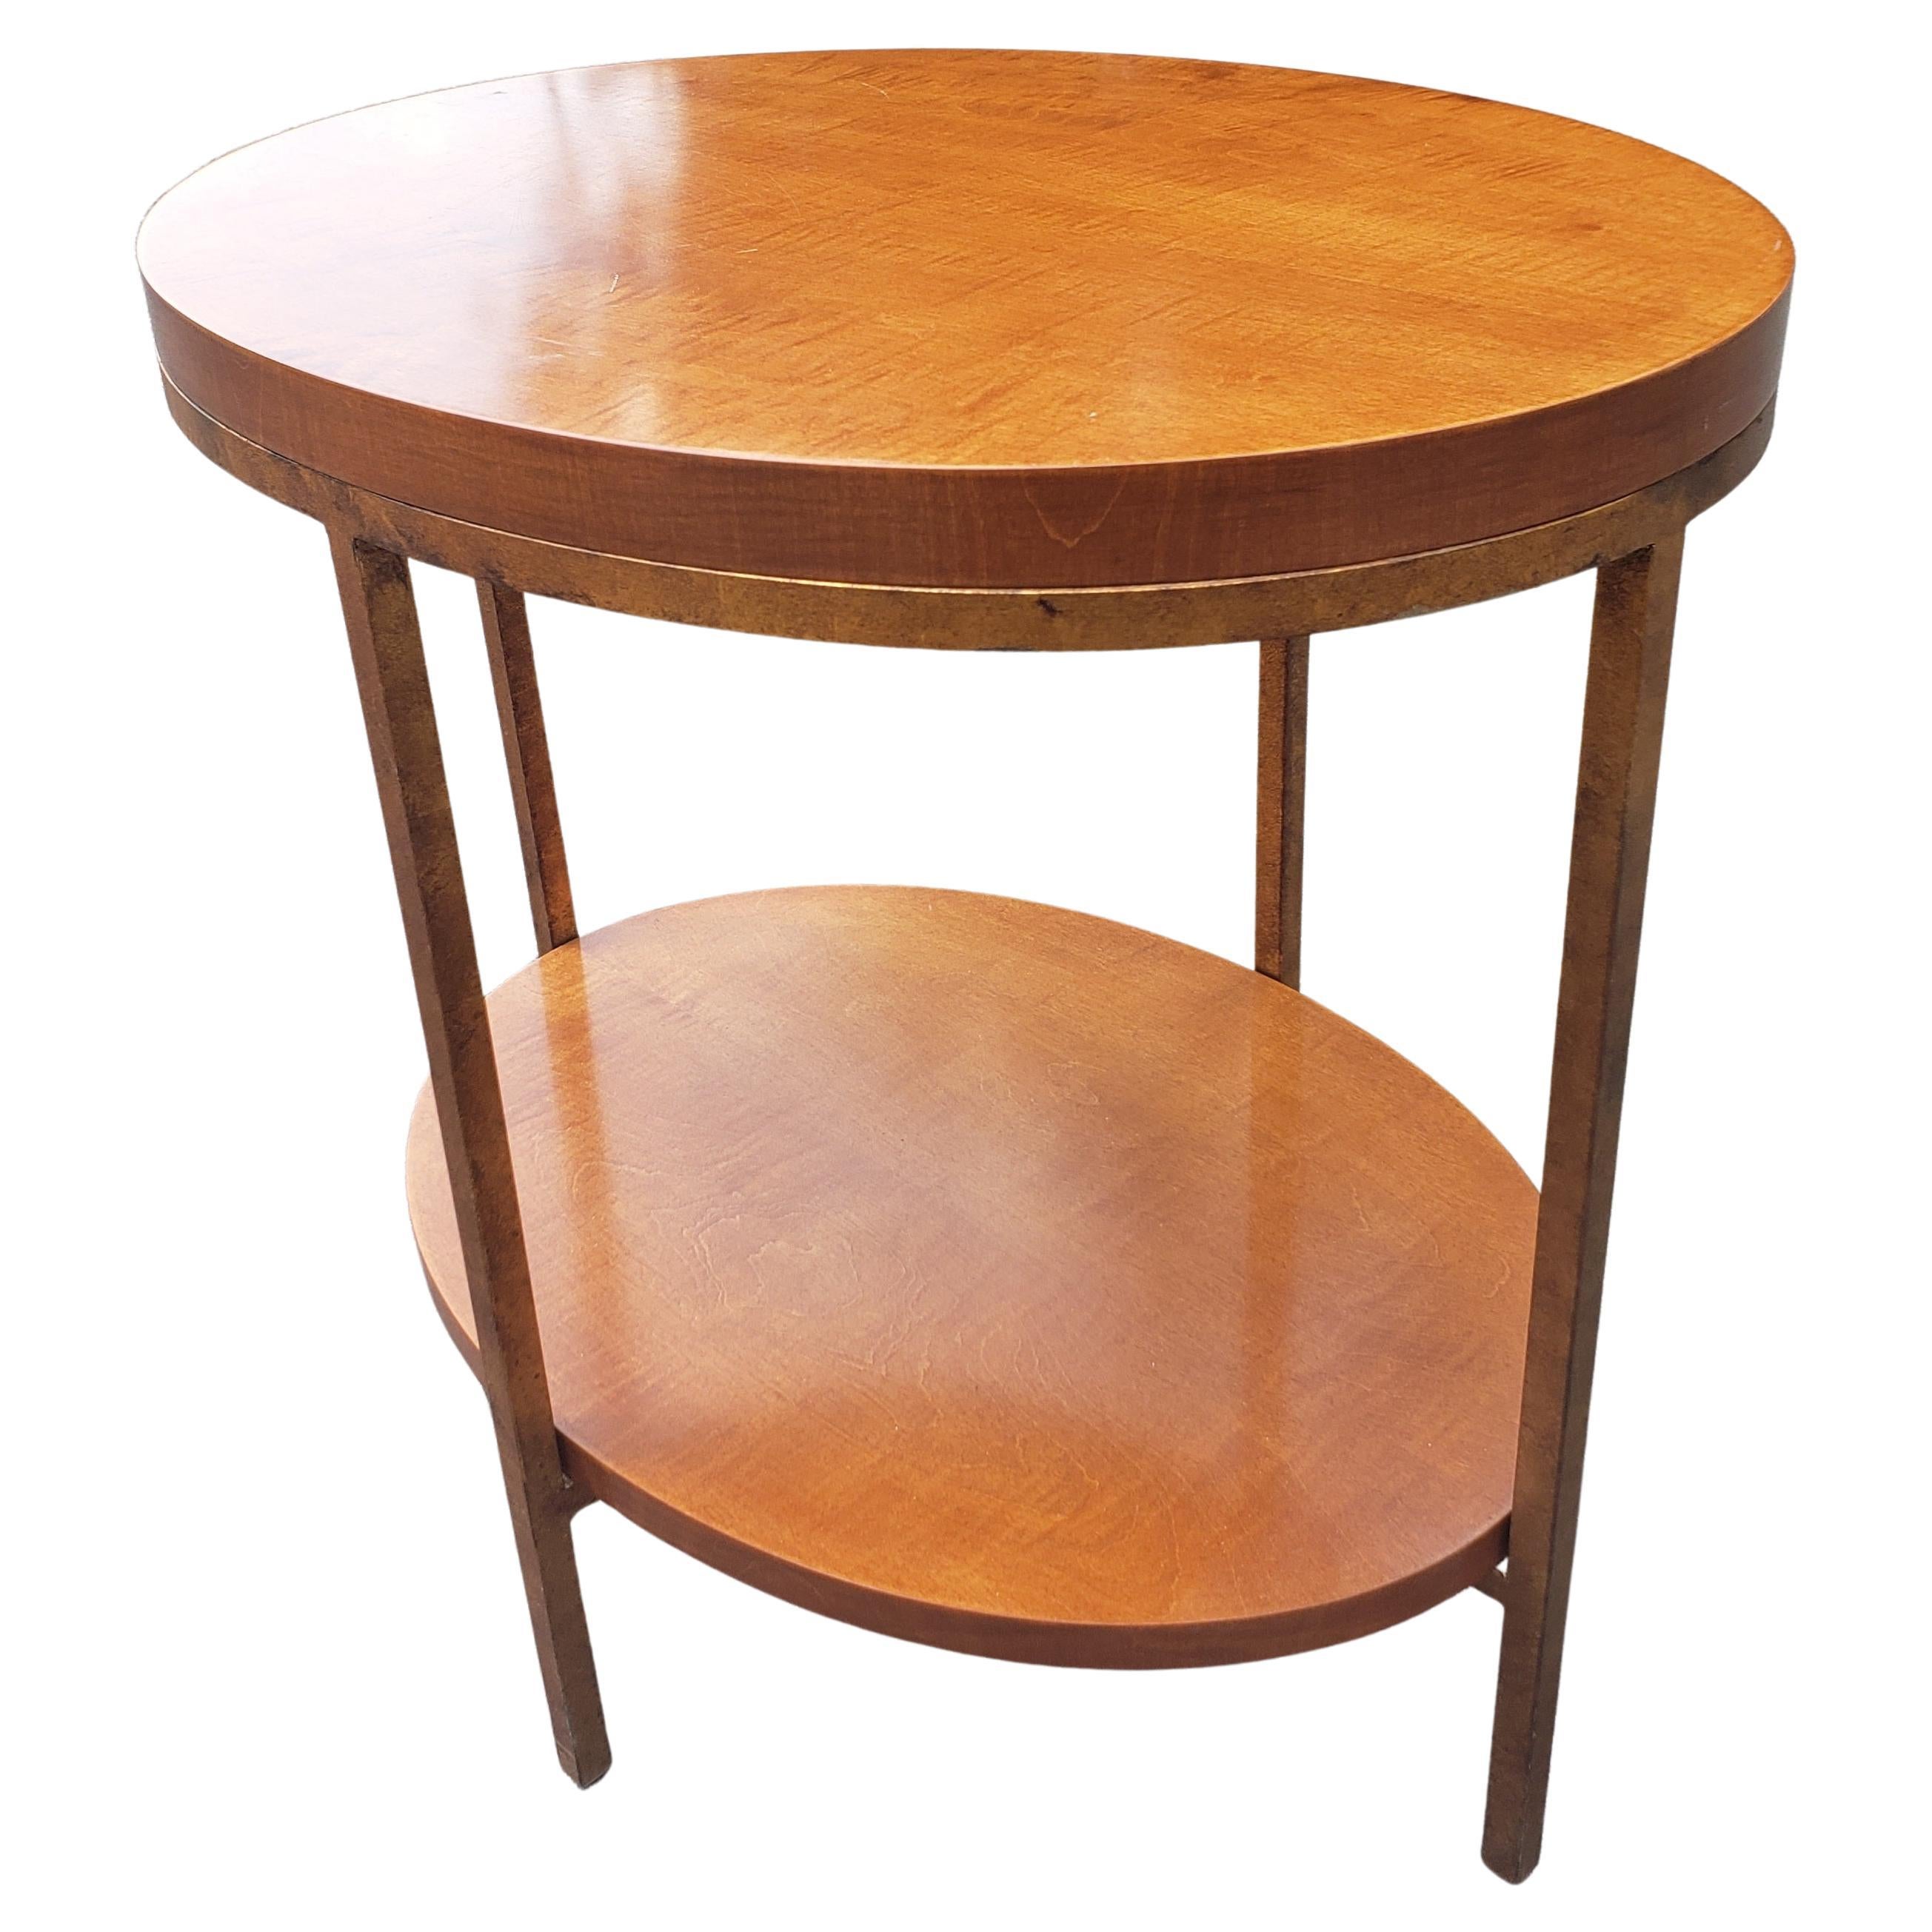 Baker Furniture Two Tier Oval Primavera Mahogany & Gilt Metal Side / Tea Table In Good Condition For Sale In Germantown, MD